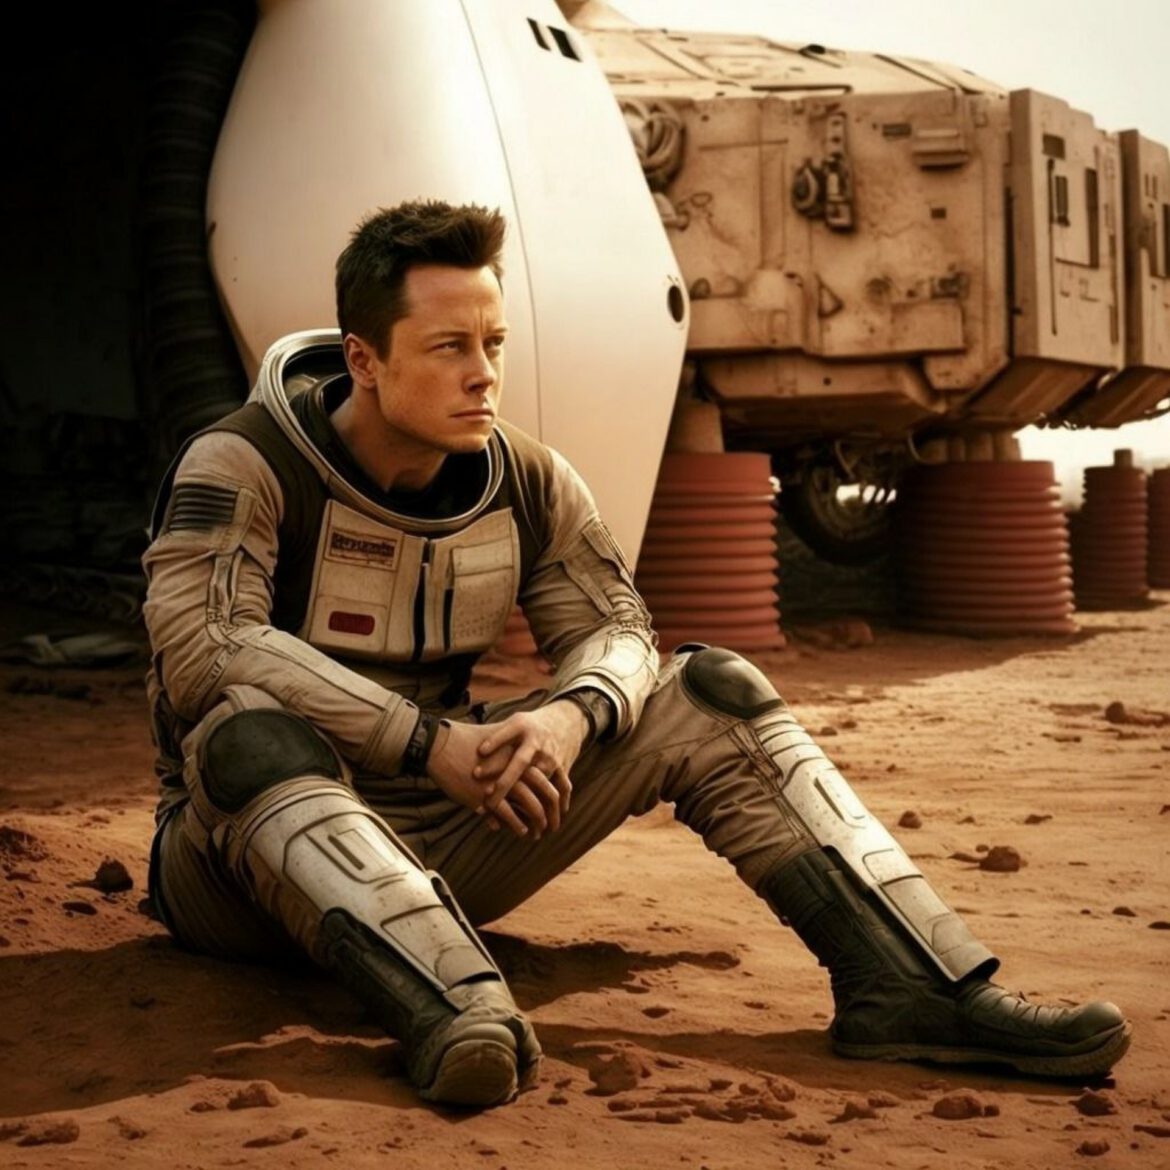 The Mars Colonization Delusion: An In-Depth Analysis of Elon Musk’s Starship and Space Projects